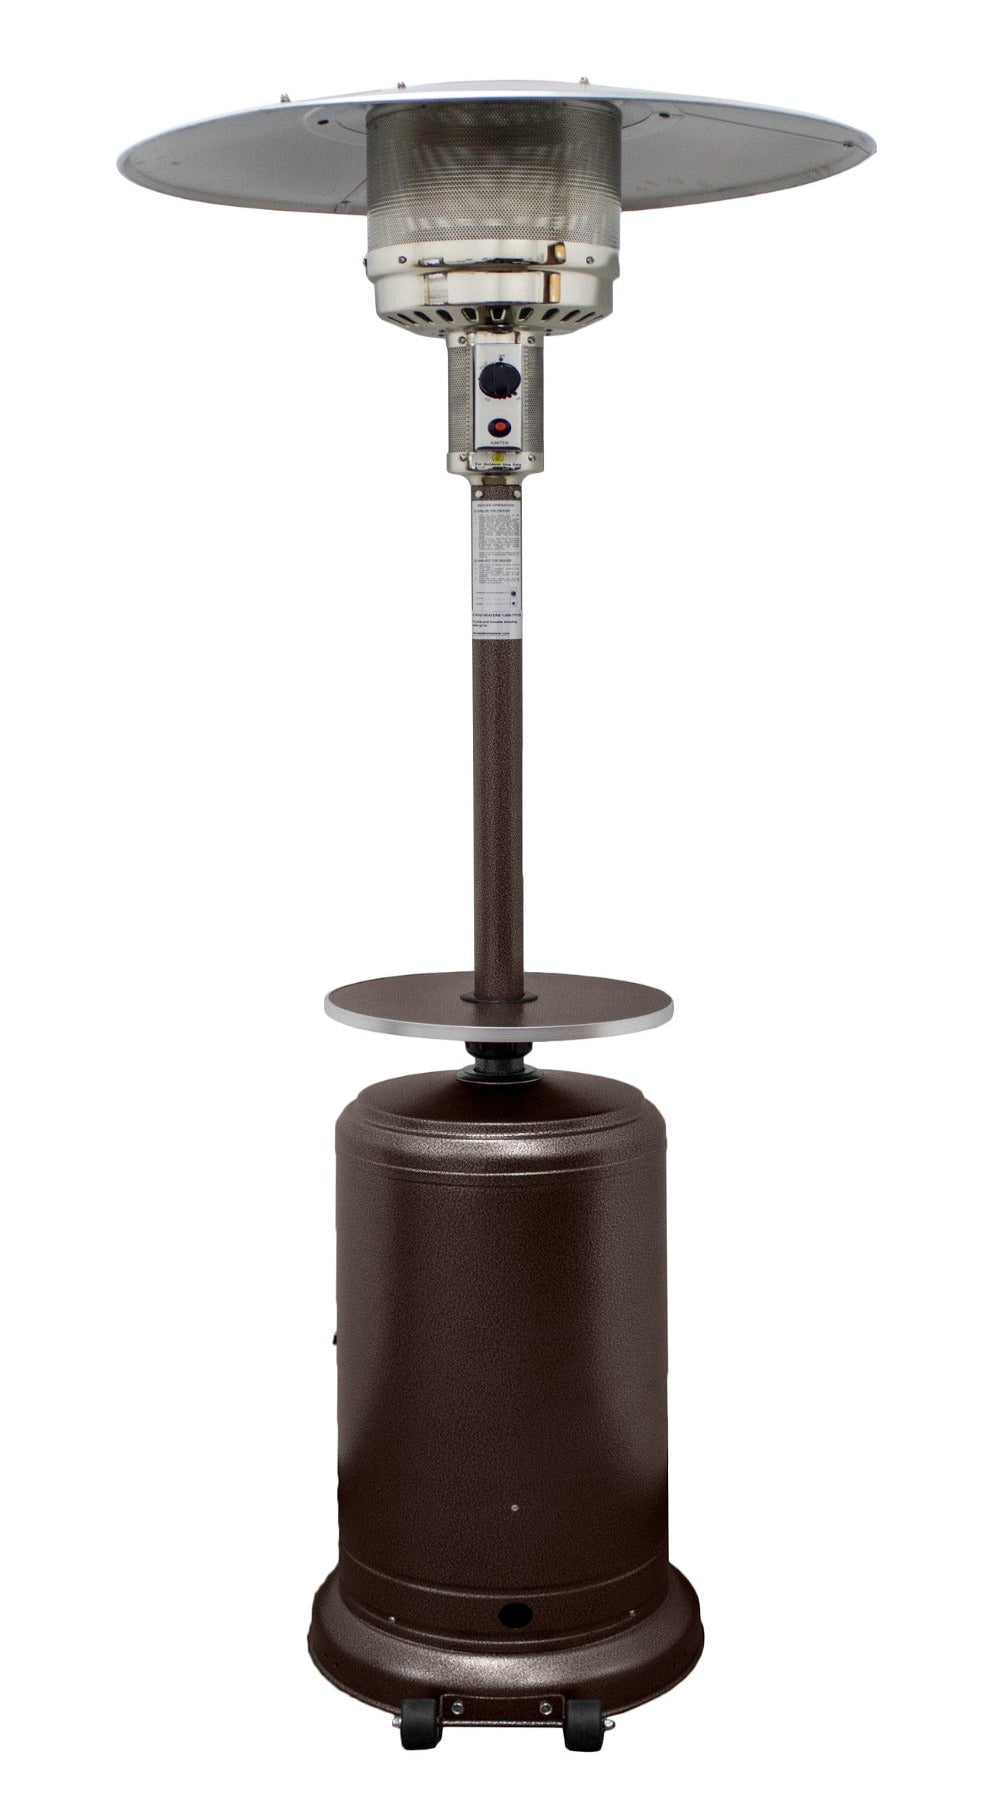 Hiland 87" Tall Outdoor Patio Heater with Table -HLDS01-CGT- Hammered Bronze- Main View